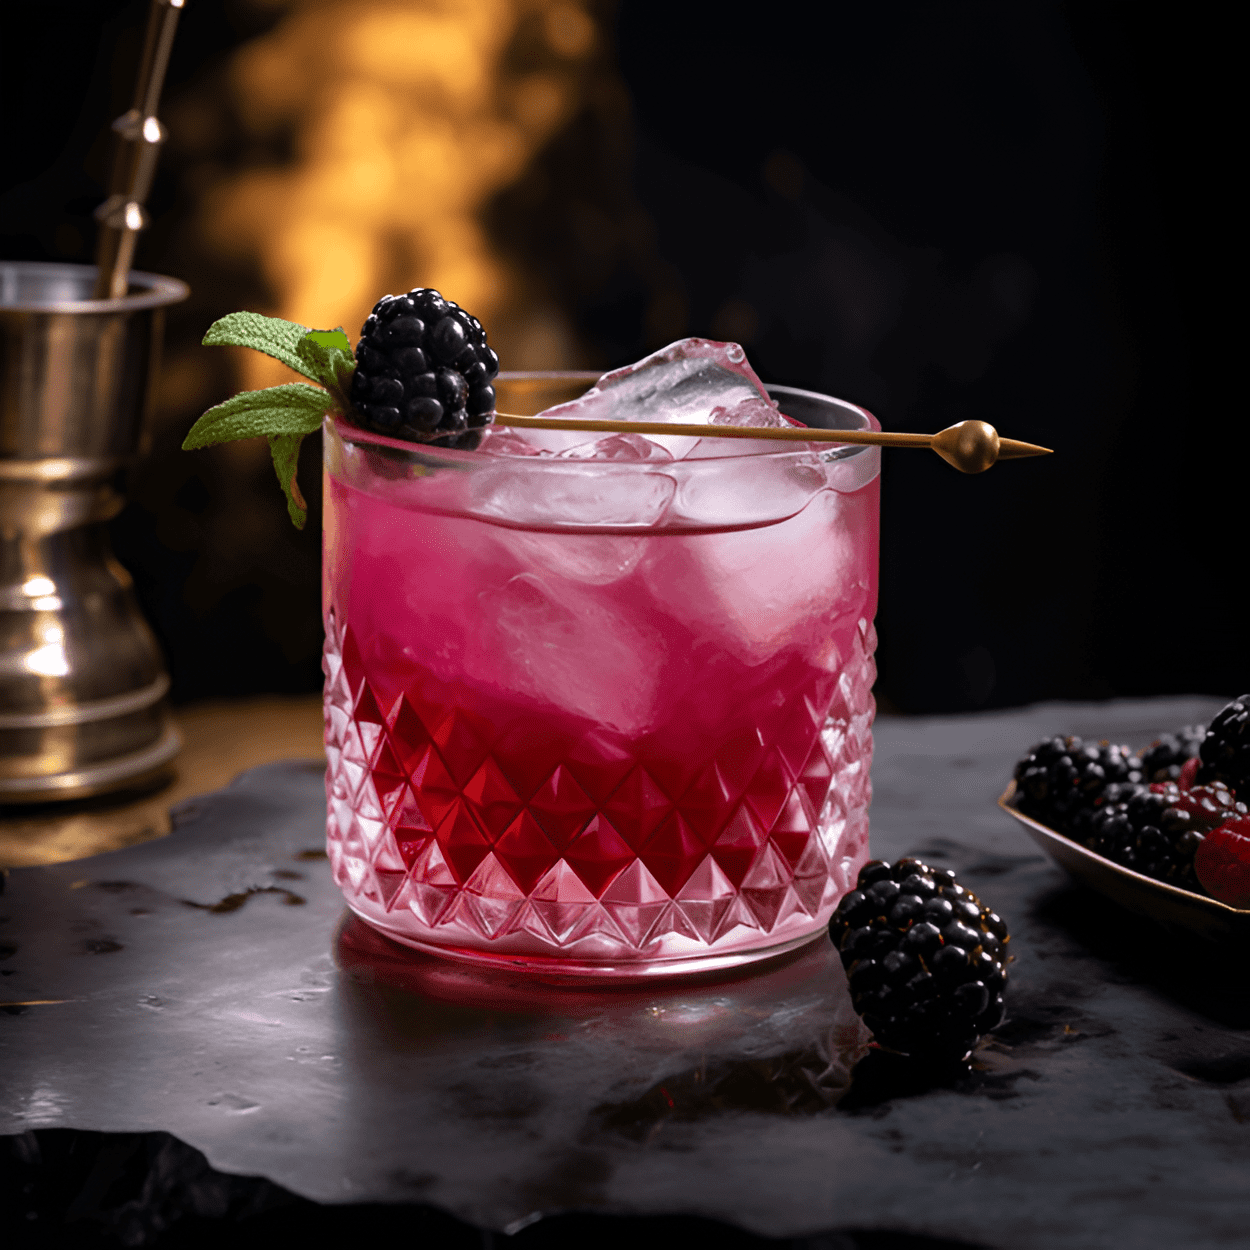 Snakebite Cocktail Recipe - The Snakebite cocktail has a crisp, refreshing taste with a perfect balance of sweet and tart flavors. The combination of lager and cider gives it a light, fruity undertone, while the blackcurrant liqueur adds a touch of sweetness and a vibrant color.